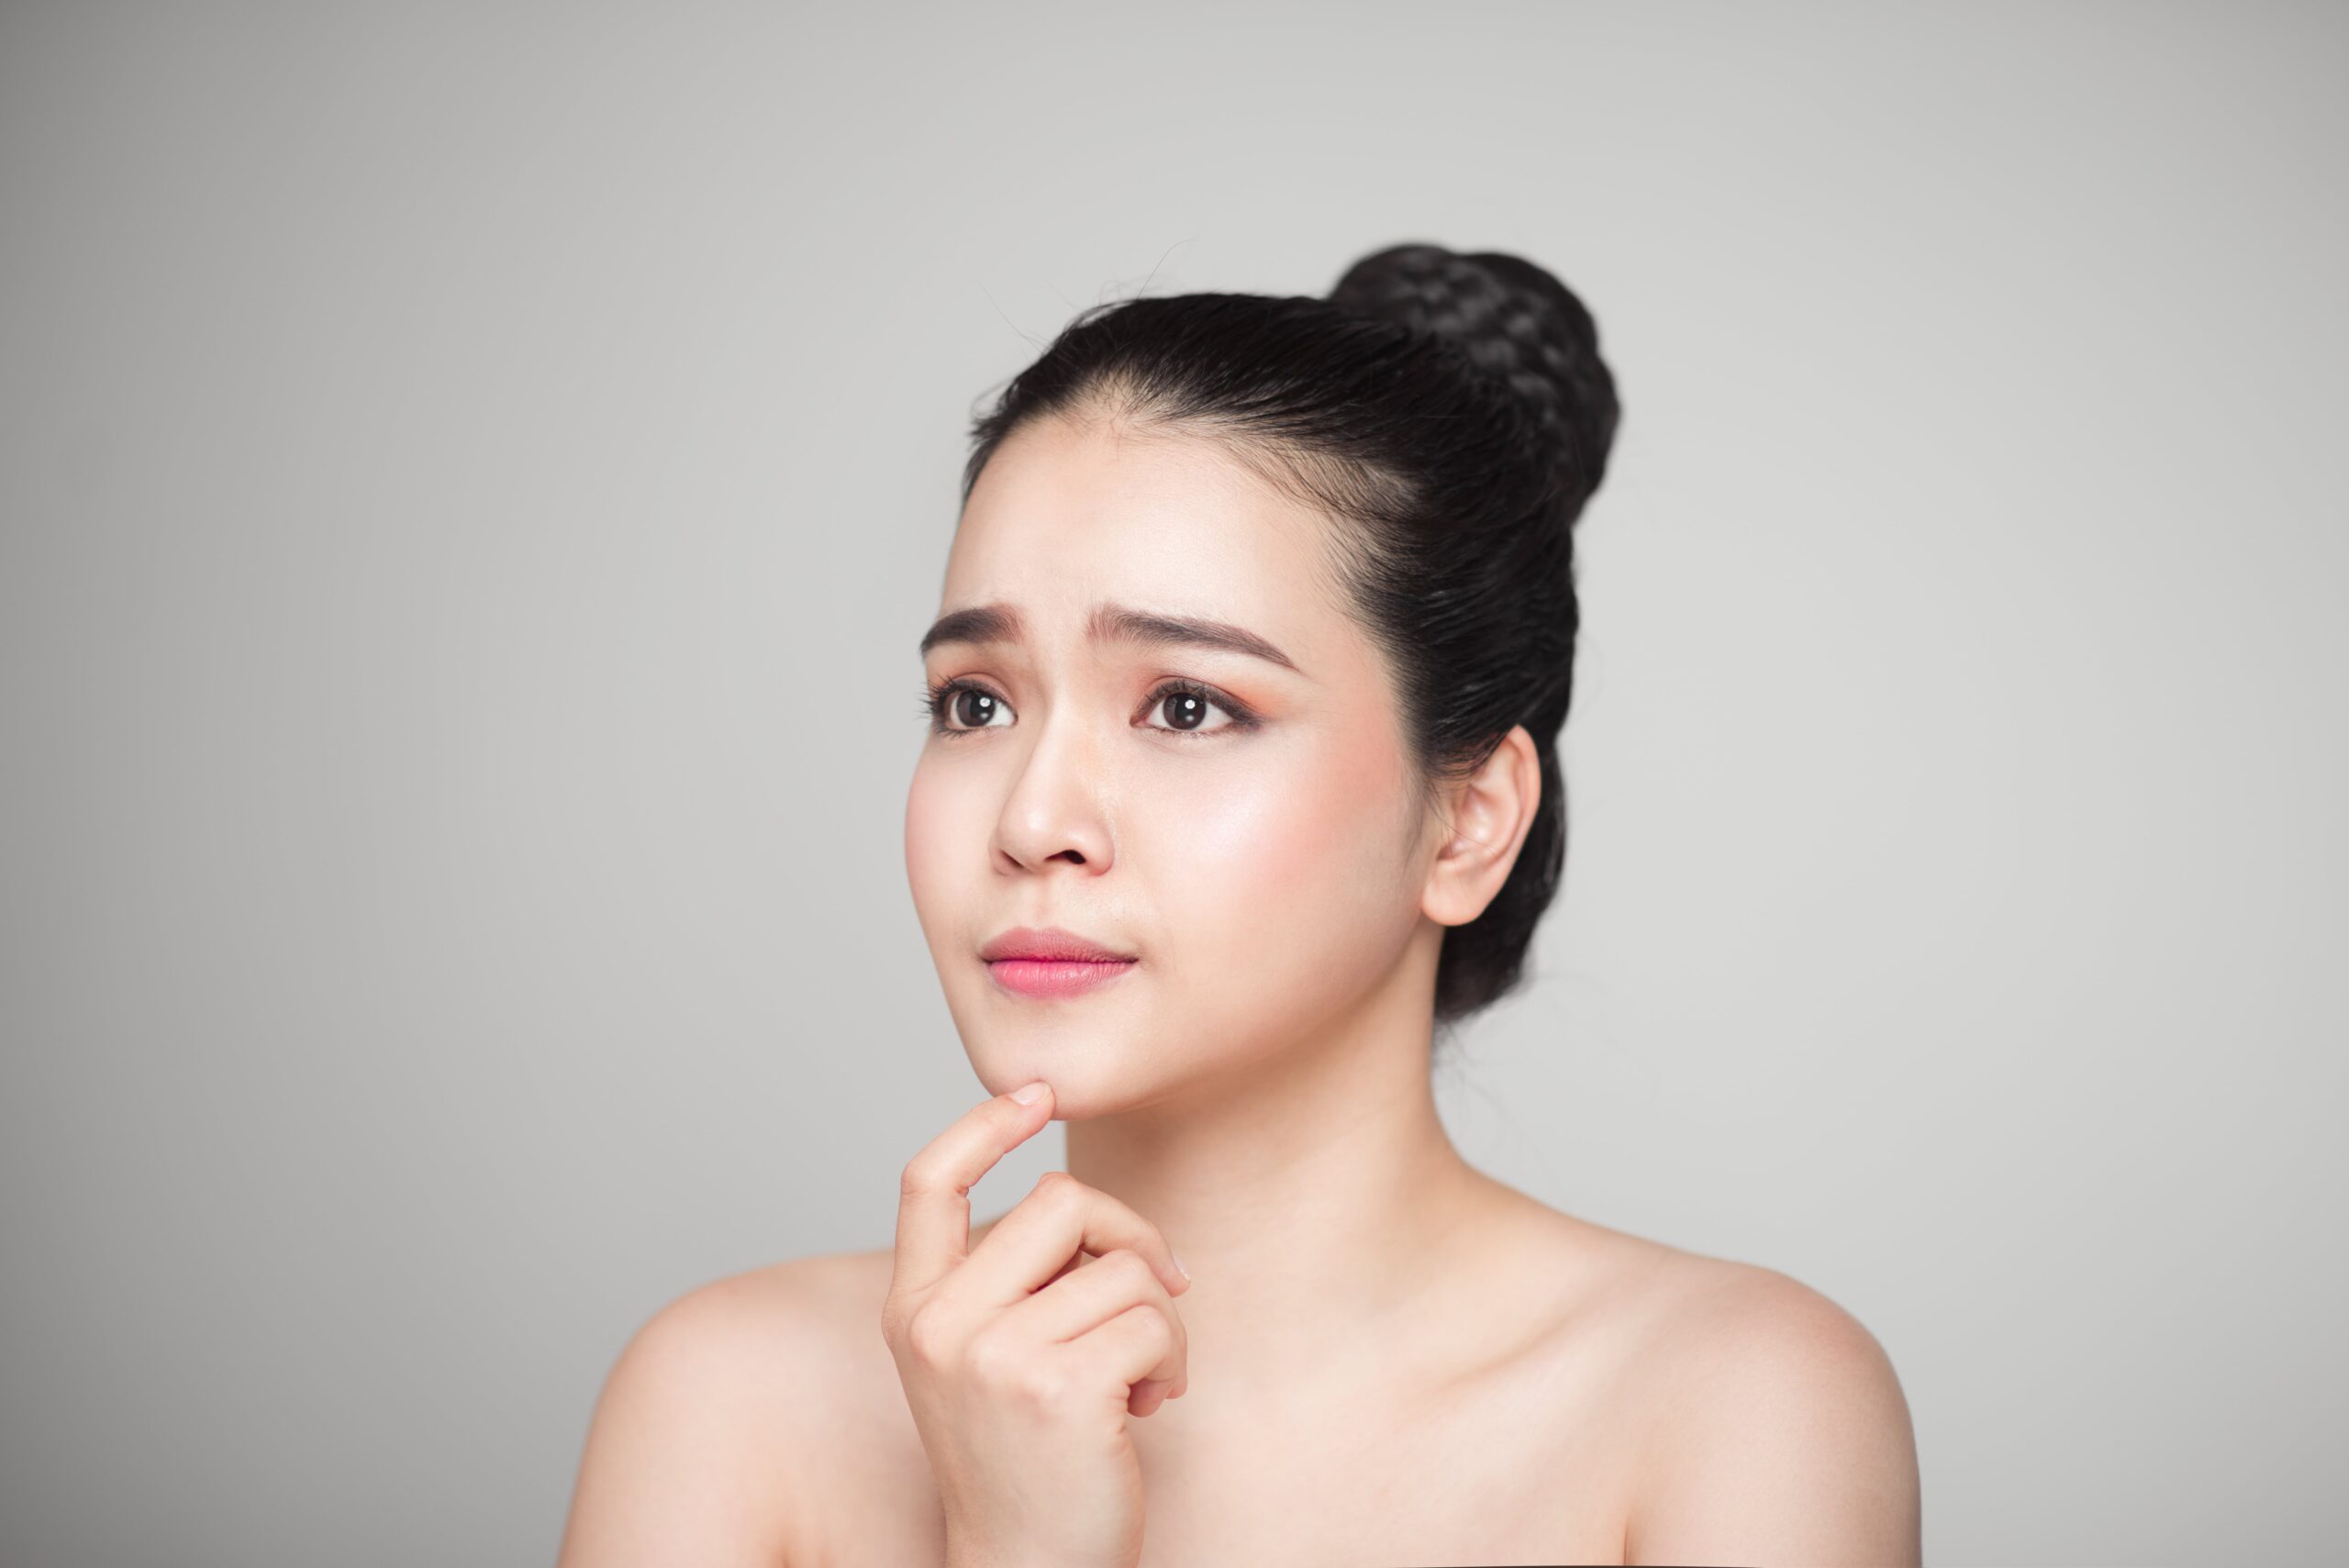 How safe is tranexamic acid for skin brightening